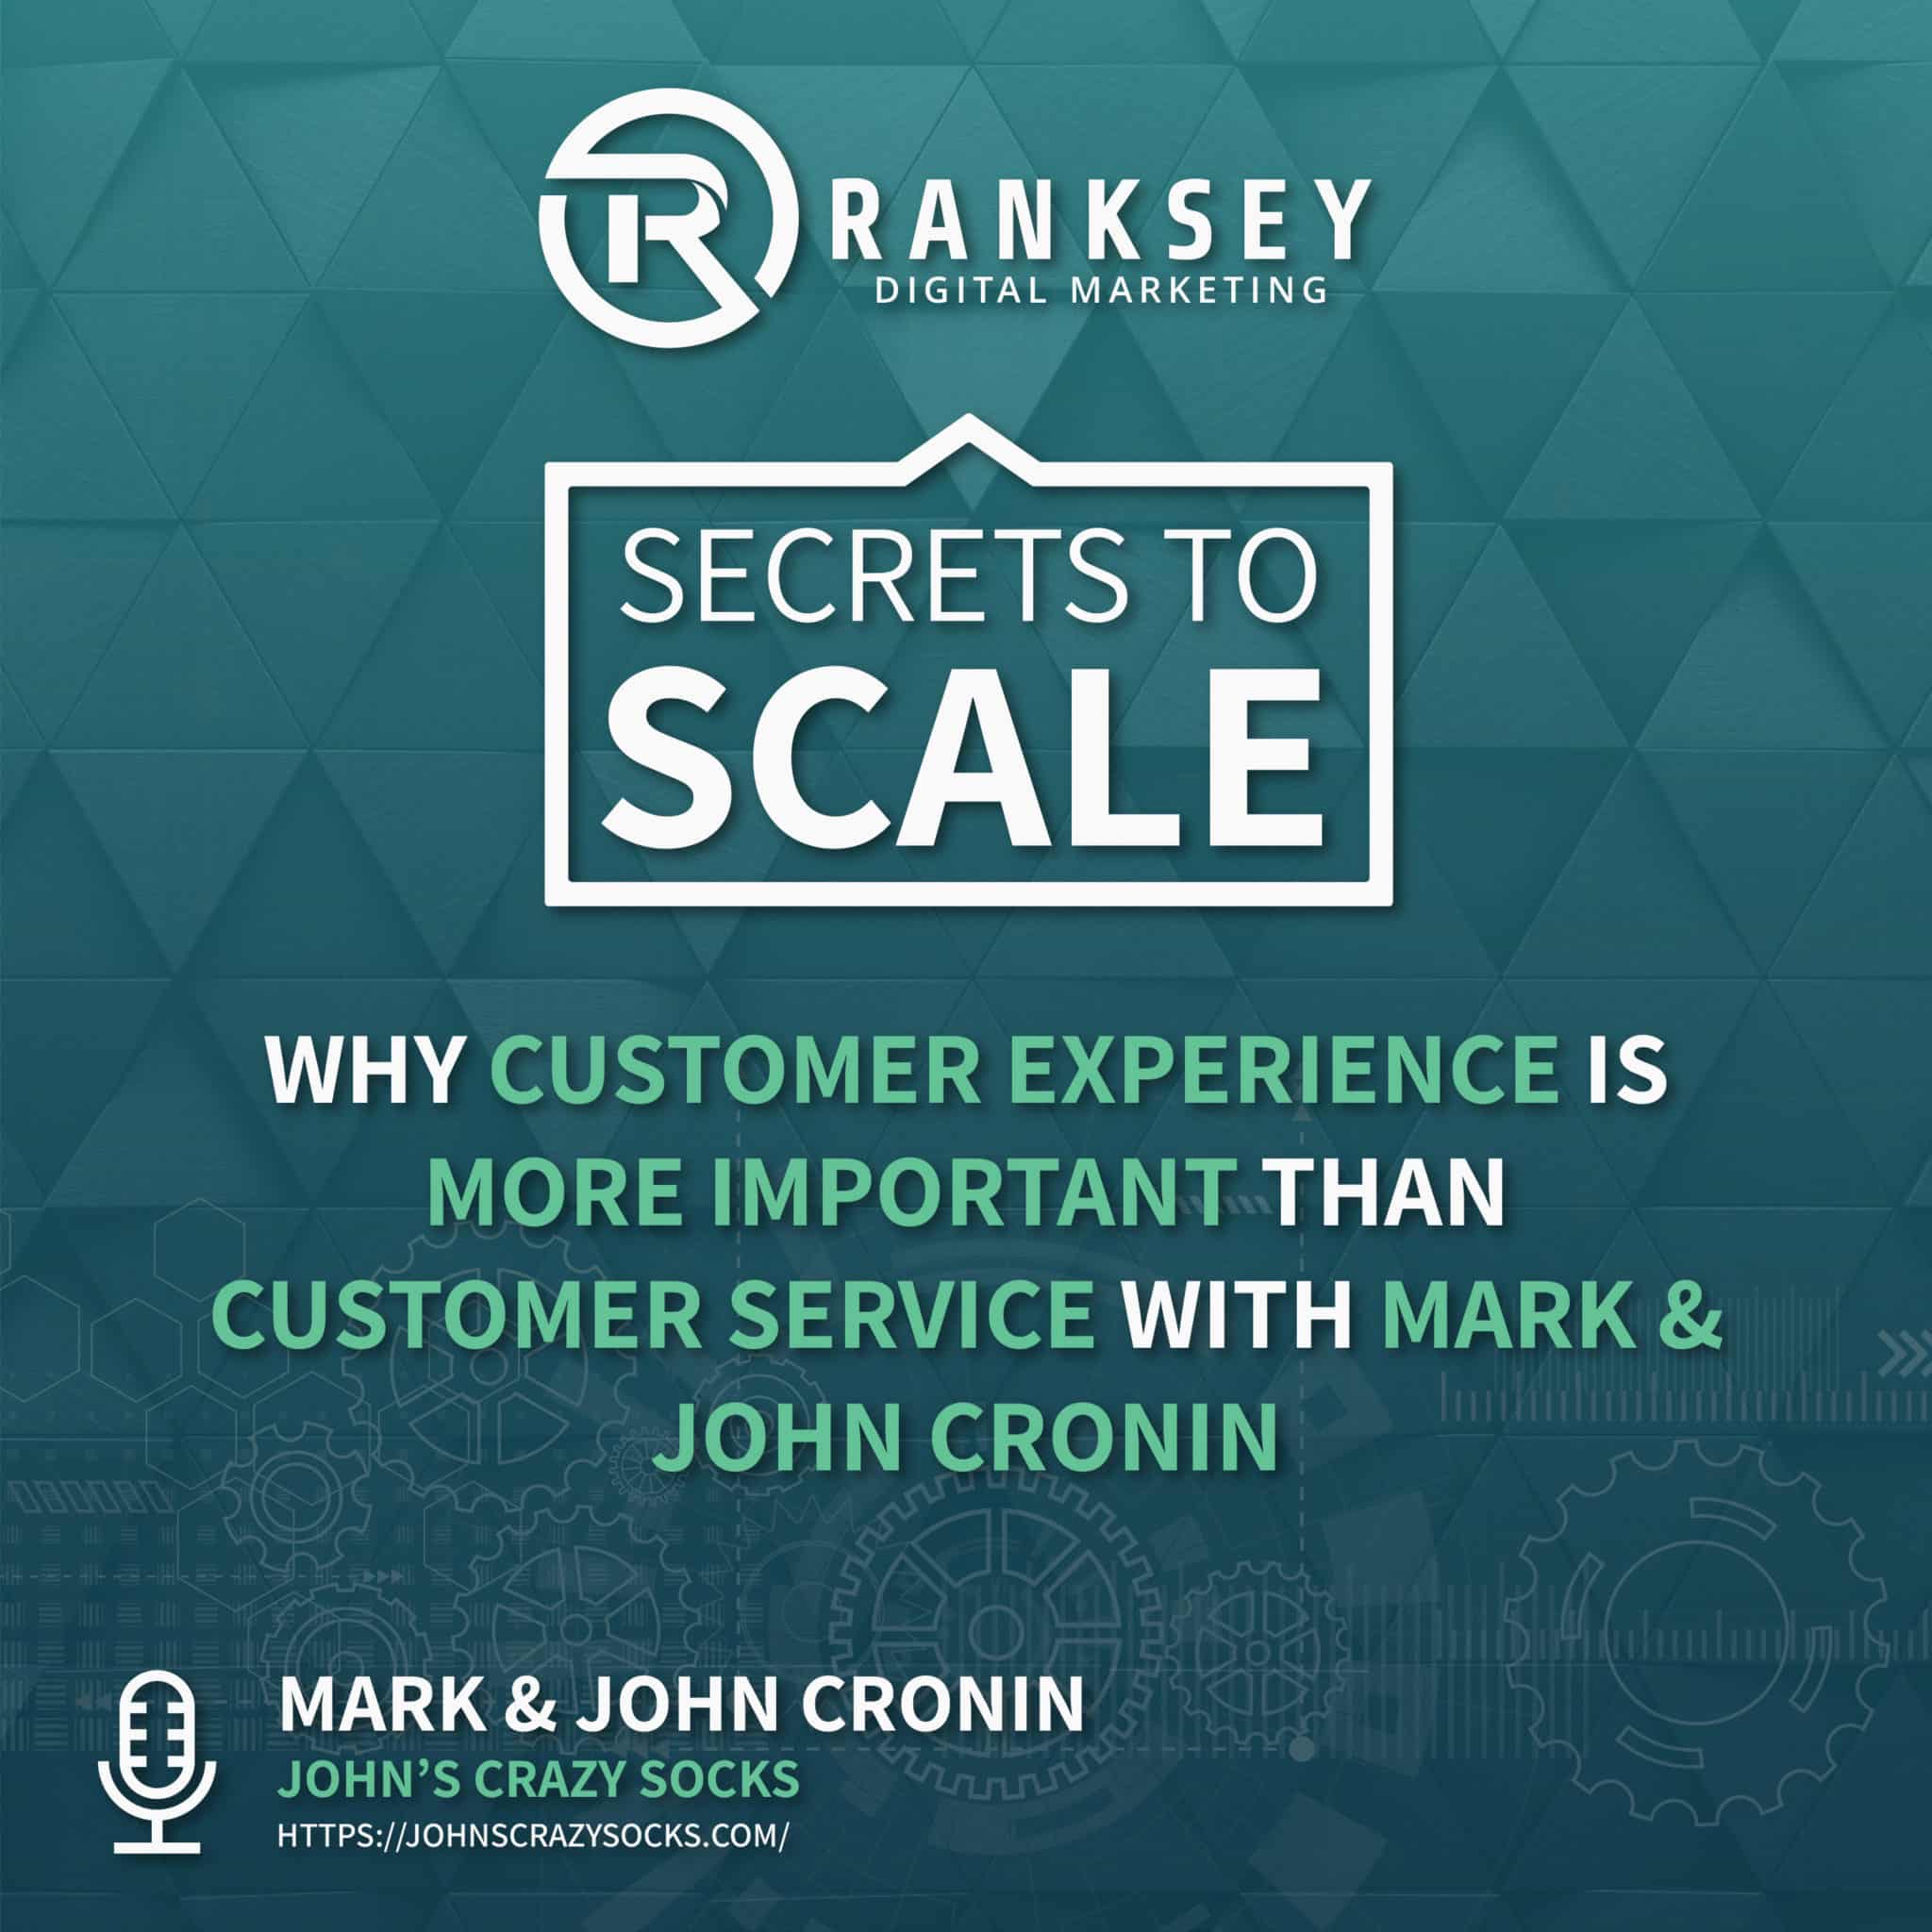 073 - Why Customer Experience Is More Important Than Customer Service With Mark & John Cronin